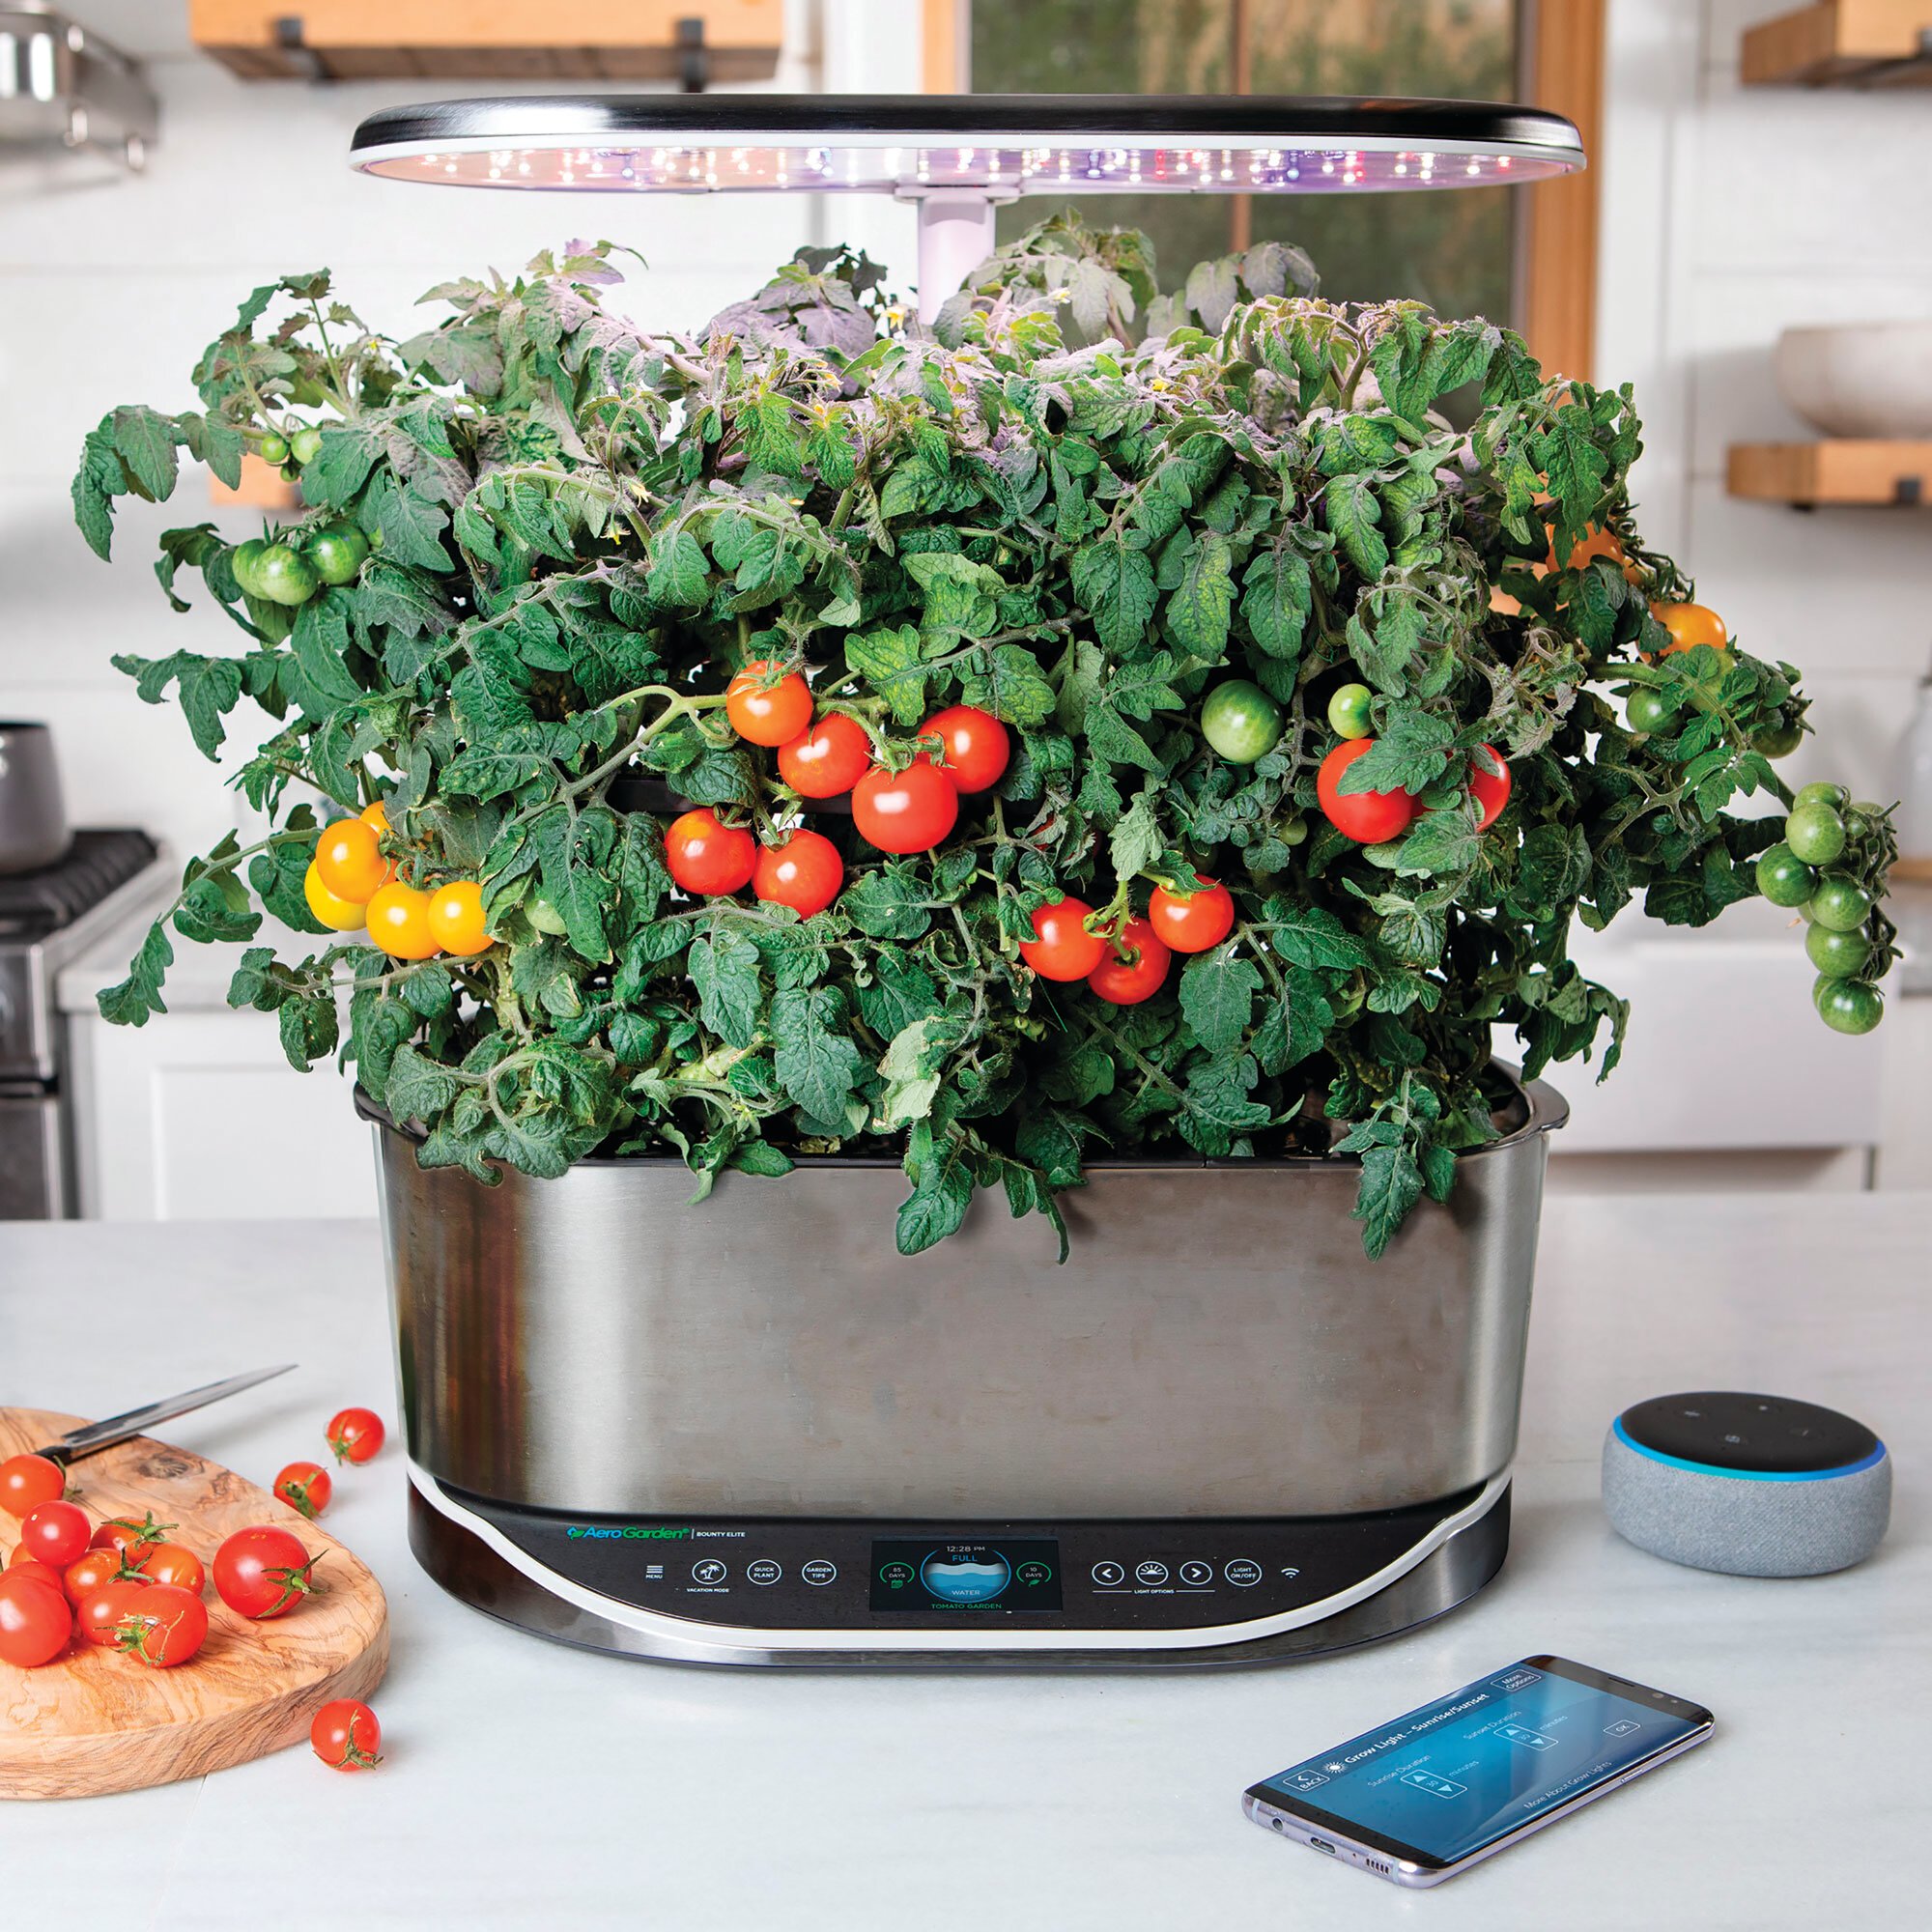 High Tech Growing Systems Bring Joy Of Gardening To Those Without